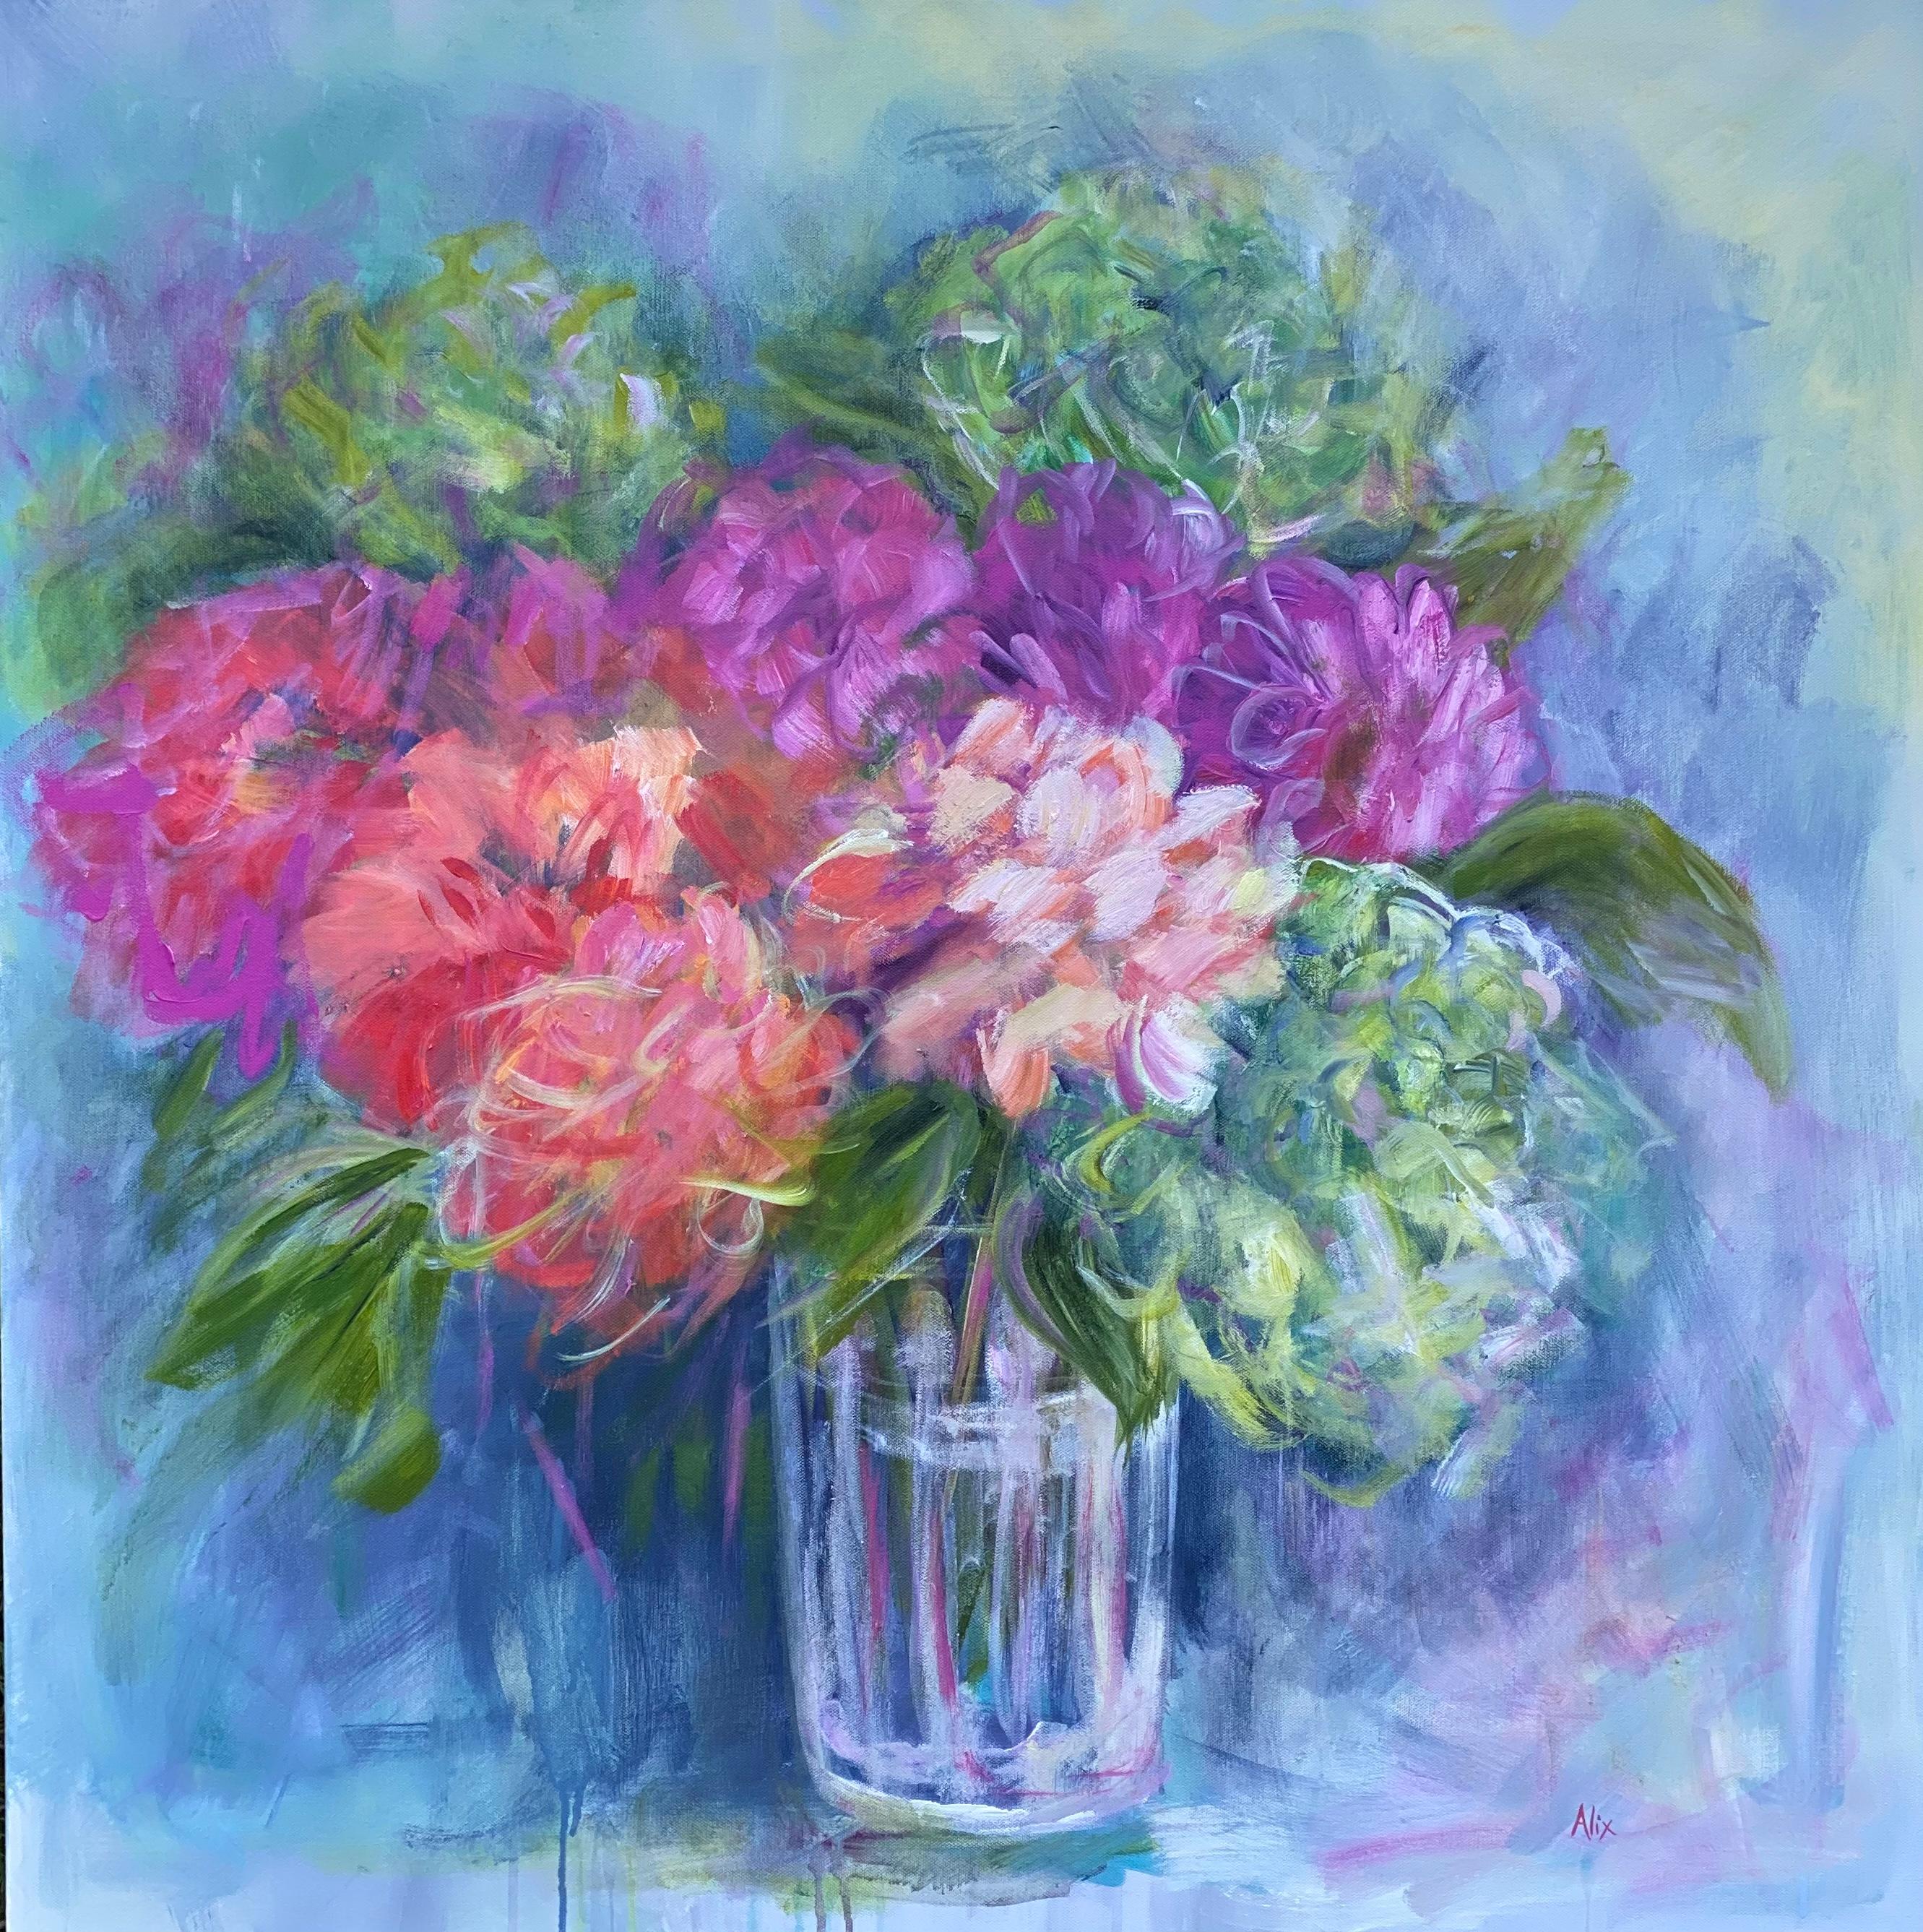 Alix  Palo Still-Life Painting - Flowers Are the Star, Original Painting